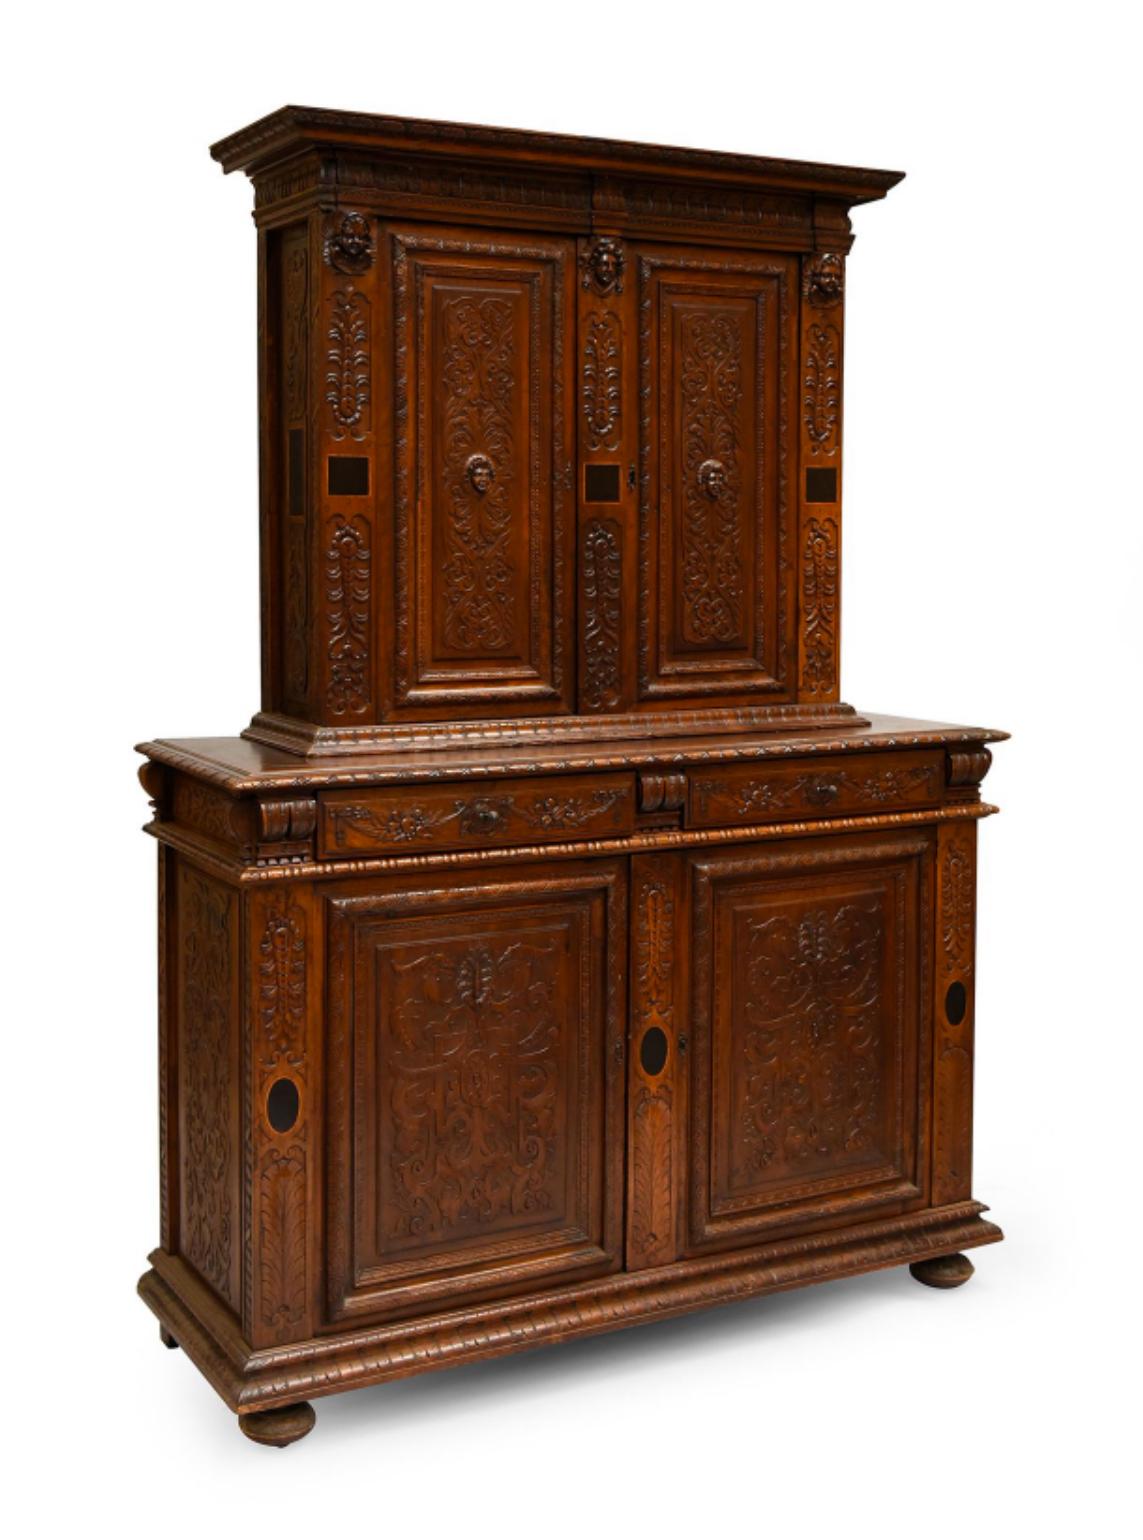 Condition : Partly dating from the Renaissance. The backs and the drawer’s insides have been re-done. 


Historical background 

The 16th century is a prosperous period for Lyon. The several fairs held in the city assure an economic vitality as